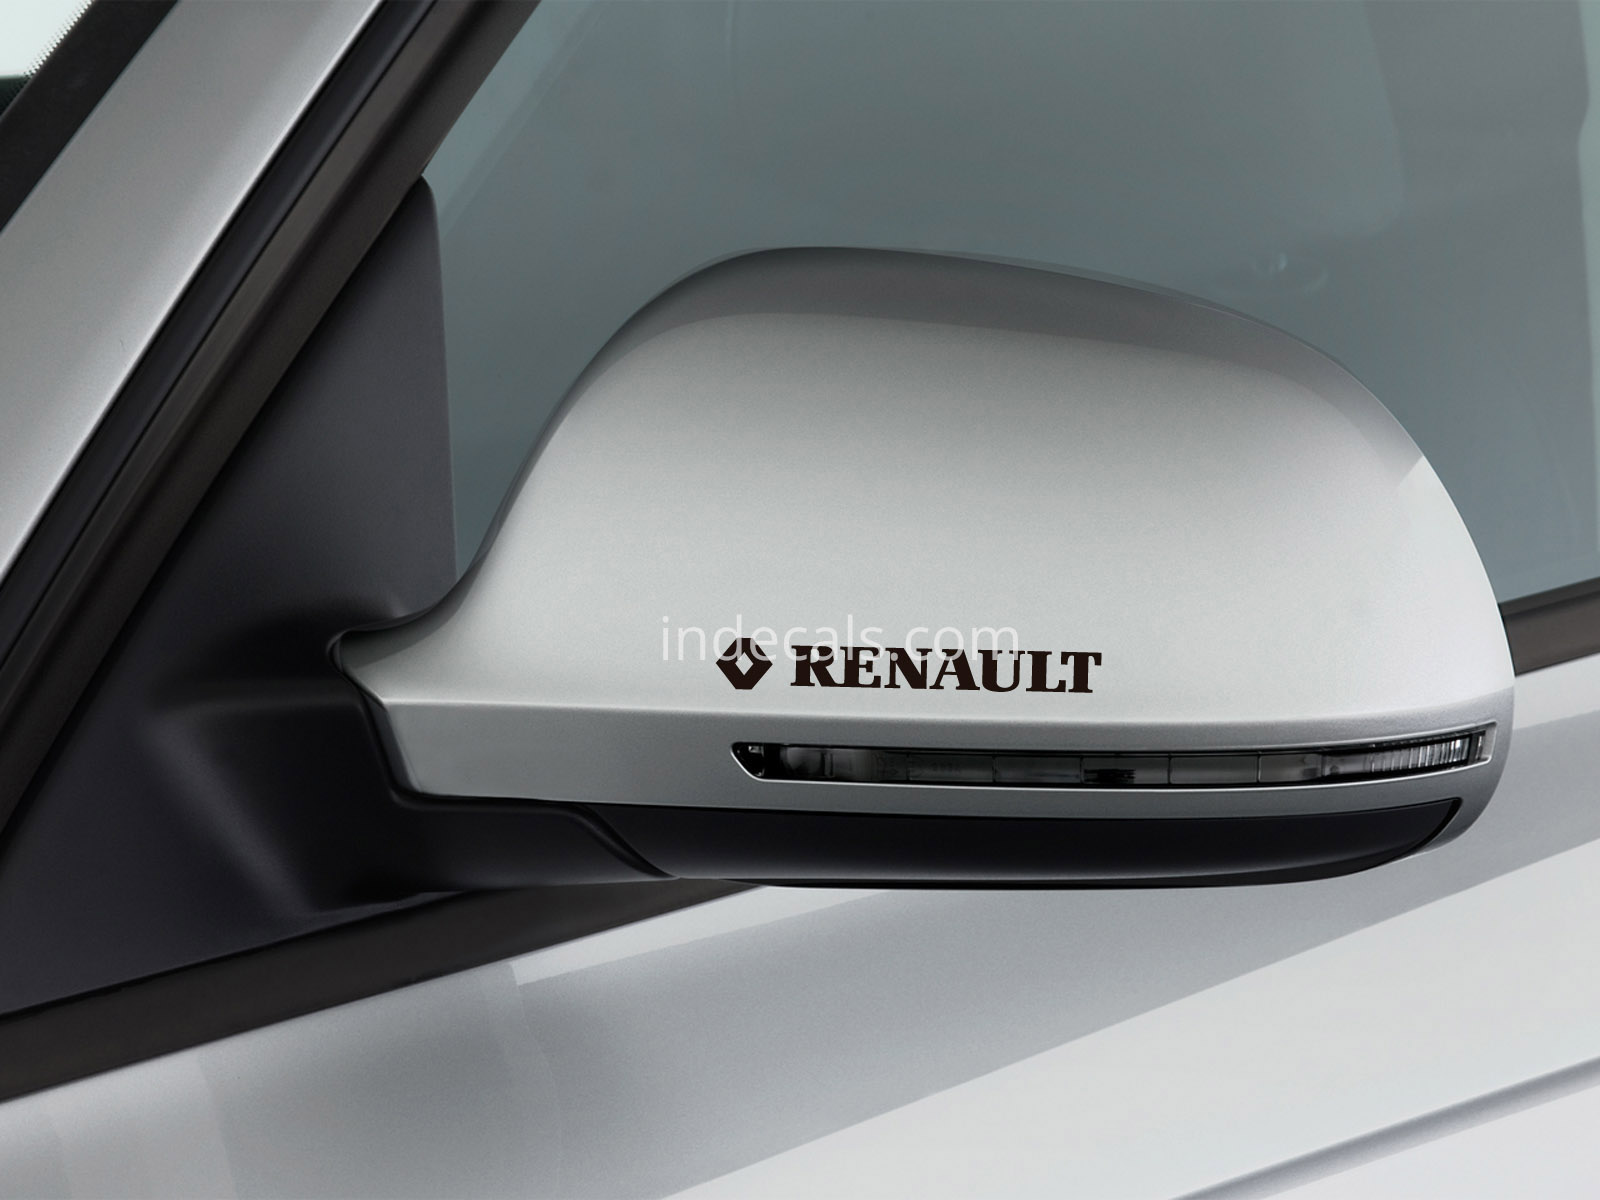 3 x Renault Stickers for Mirrors - Black